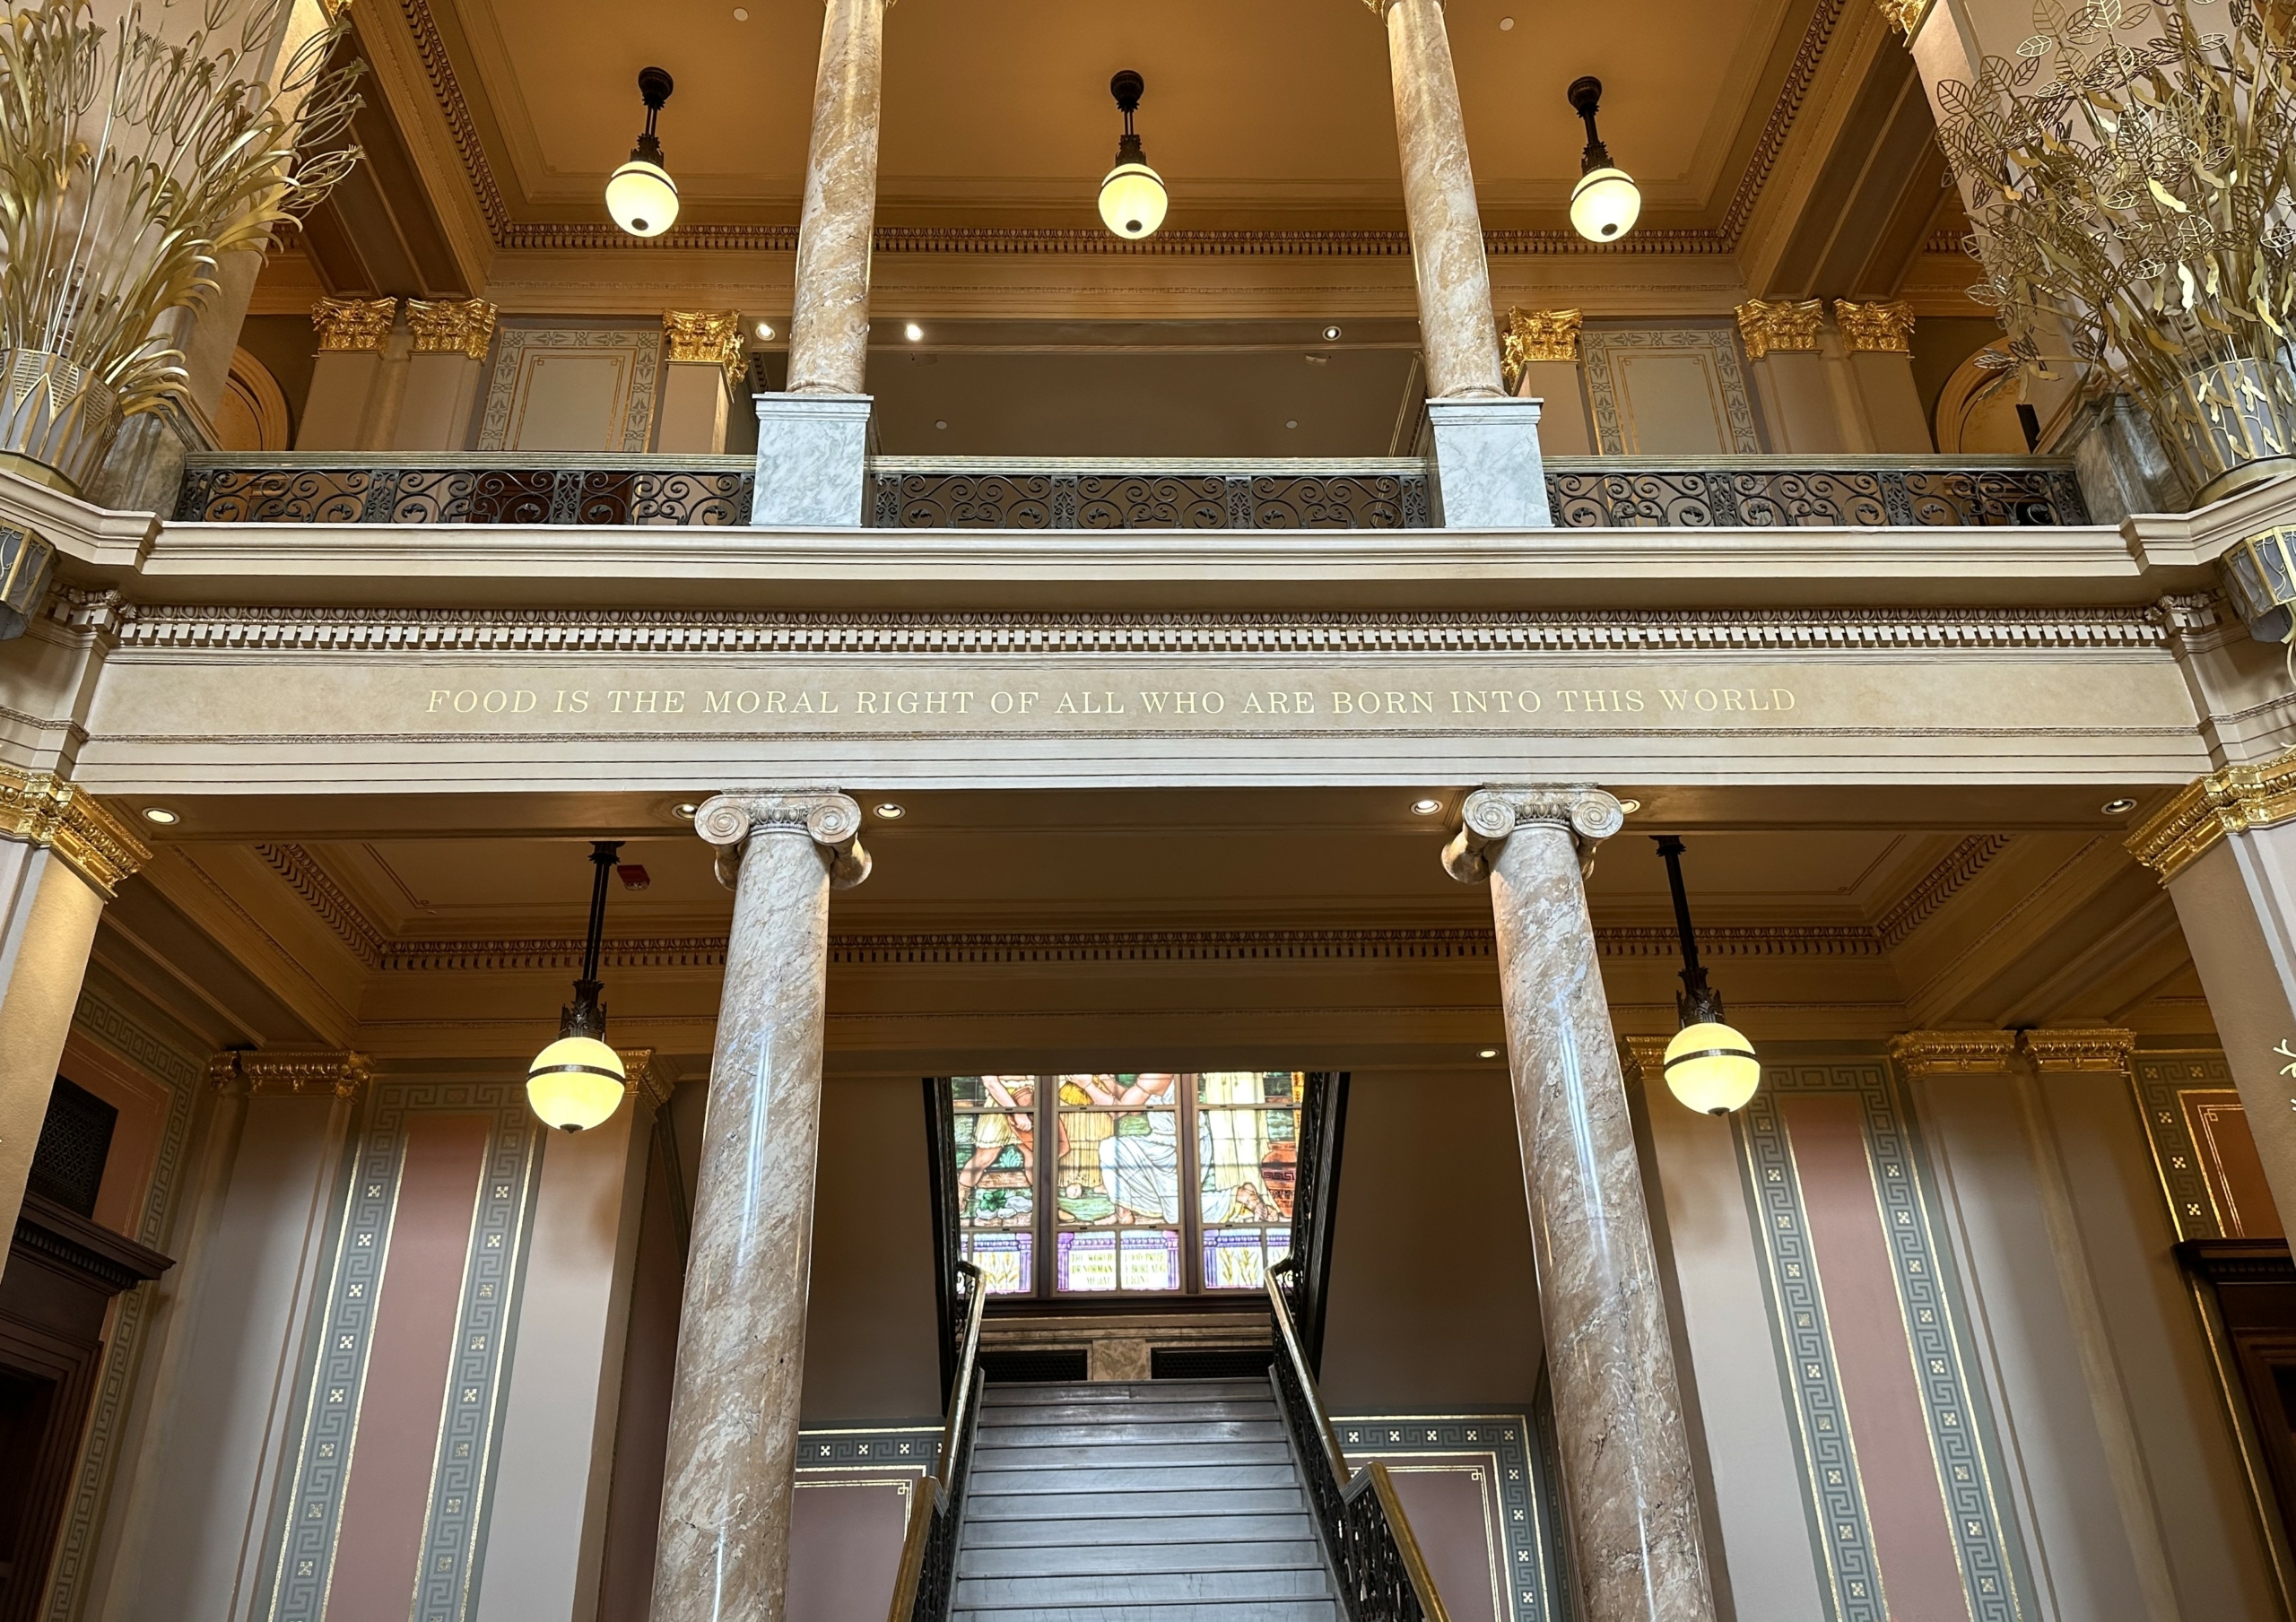 This image shows the entrance of the World Food Prize Hall of Laureates and a quote by the late Dr. Norman Borlaug.